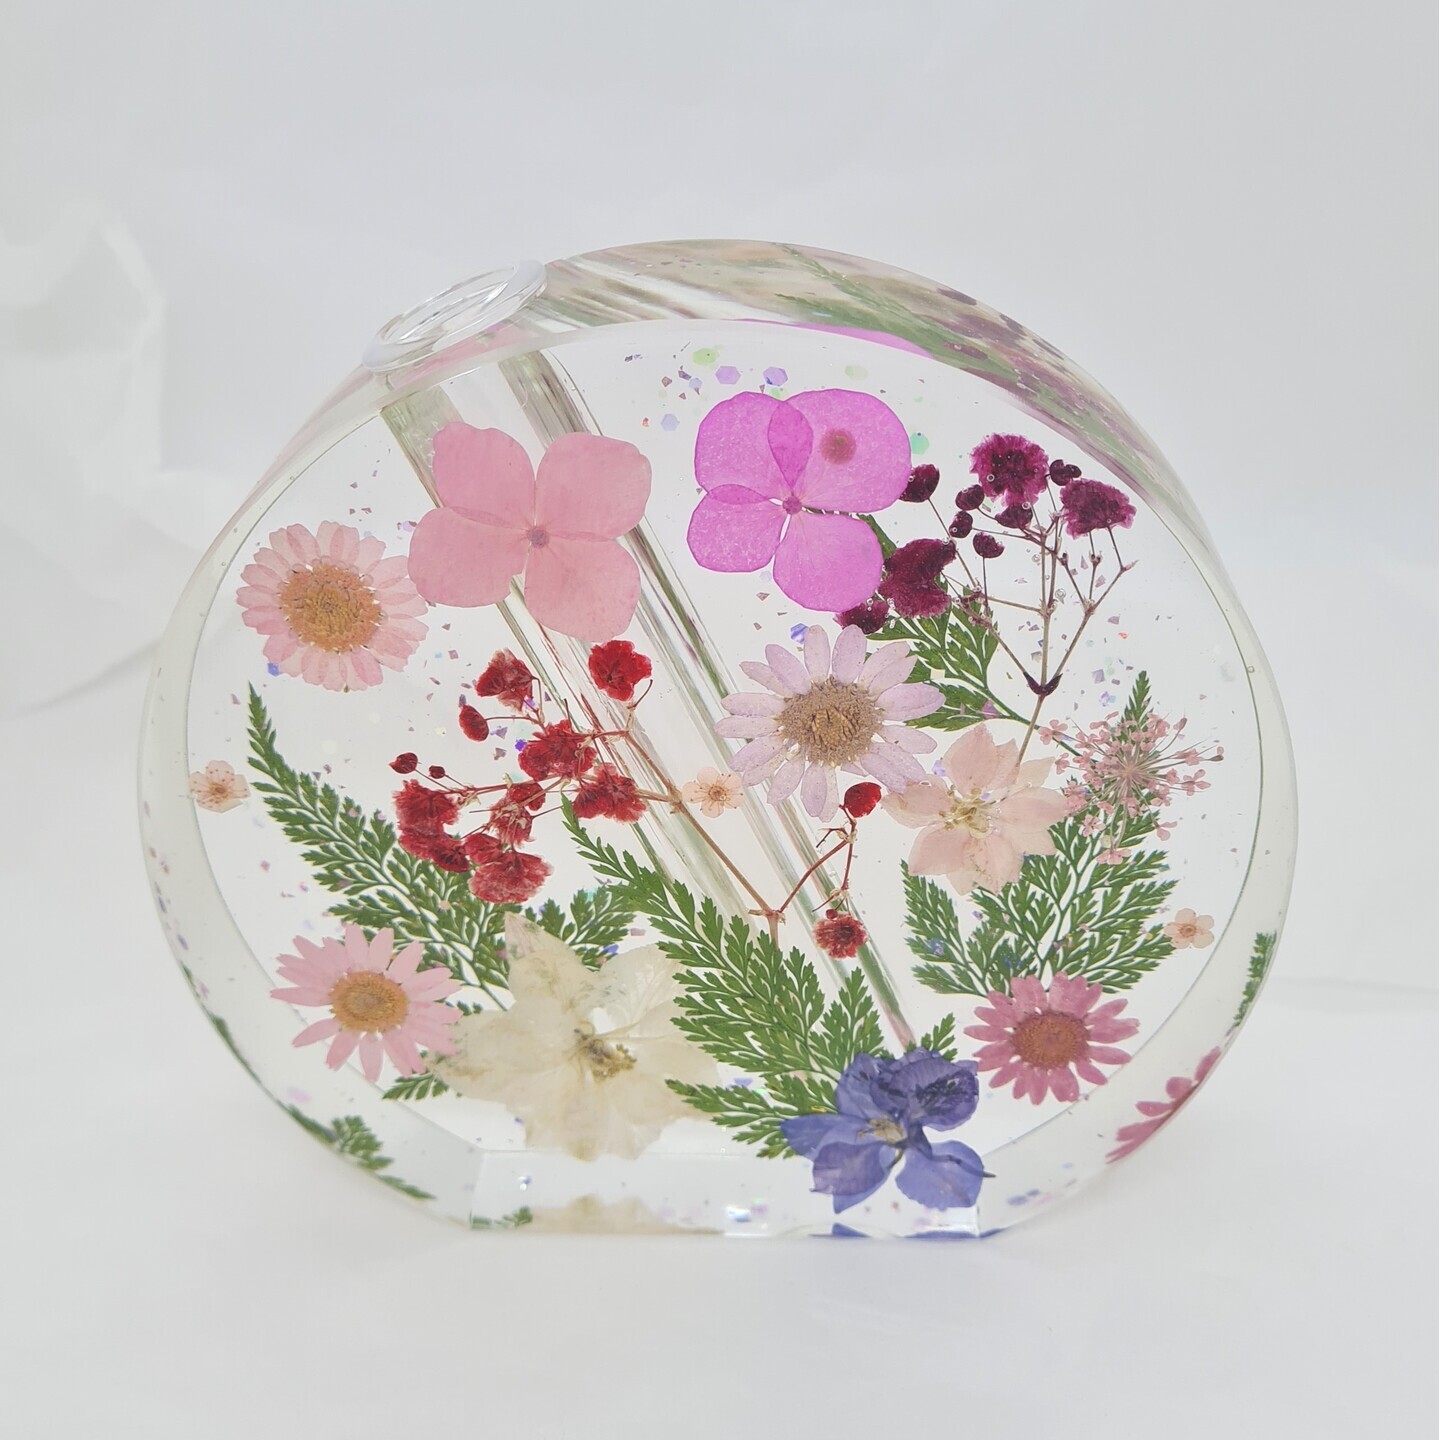 Resin vase with real flowers & leaves  Handmade by special needs artisan